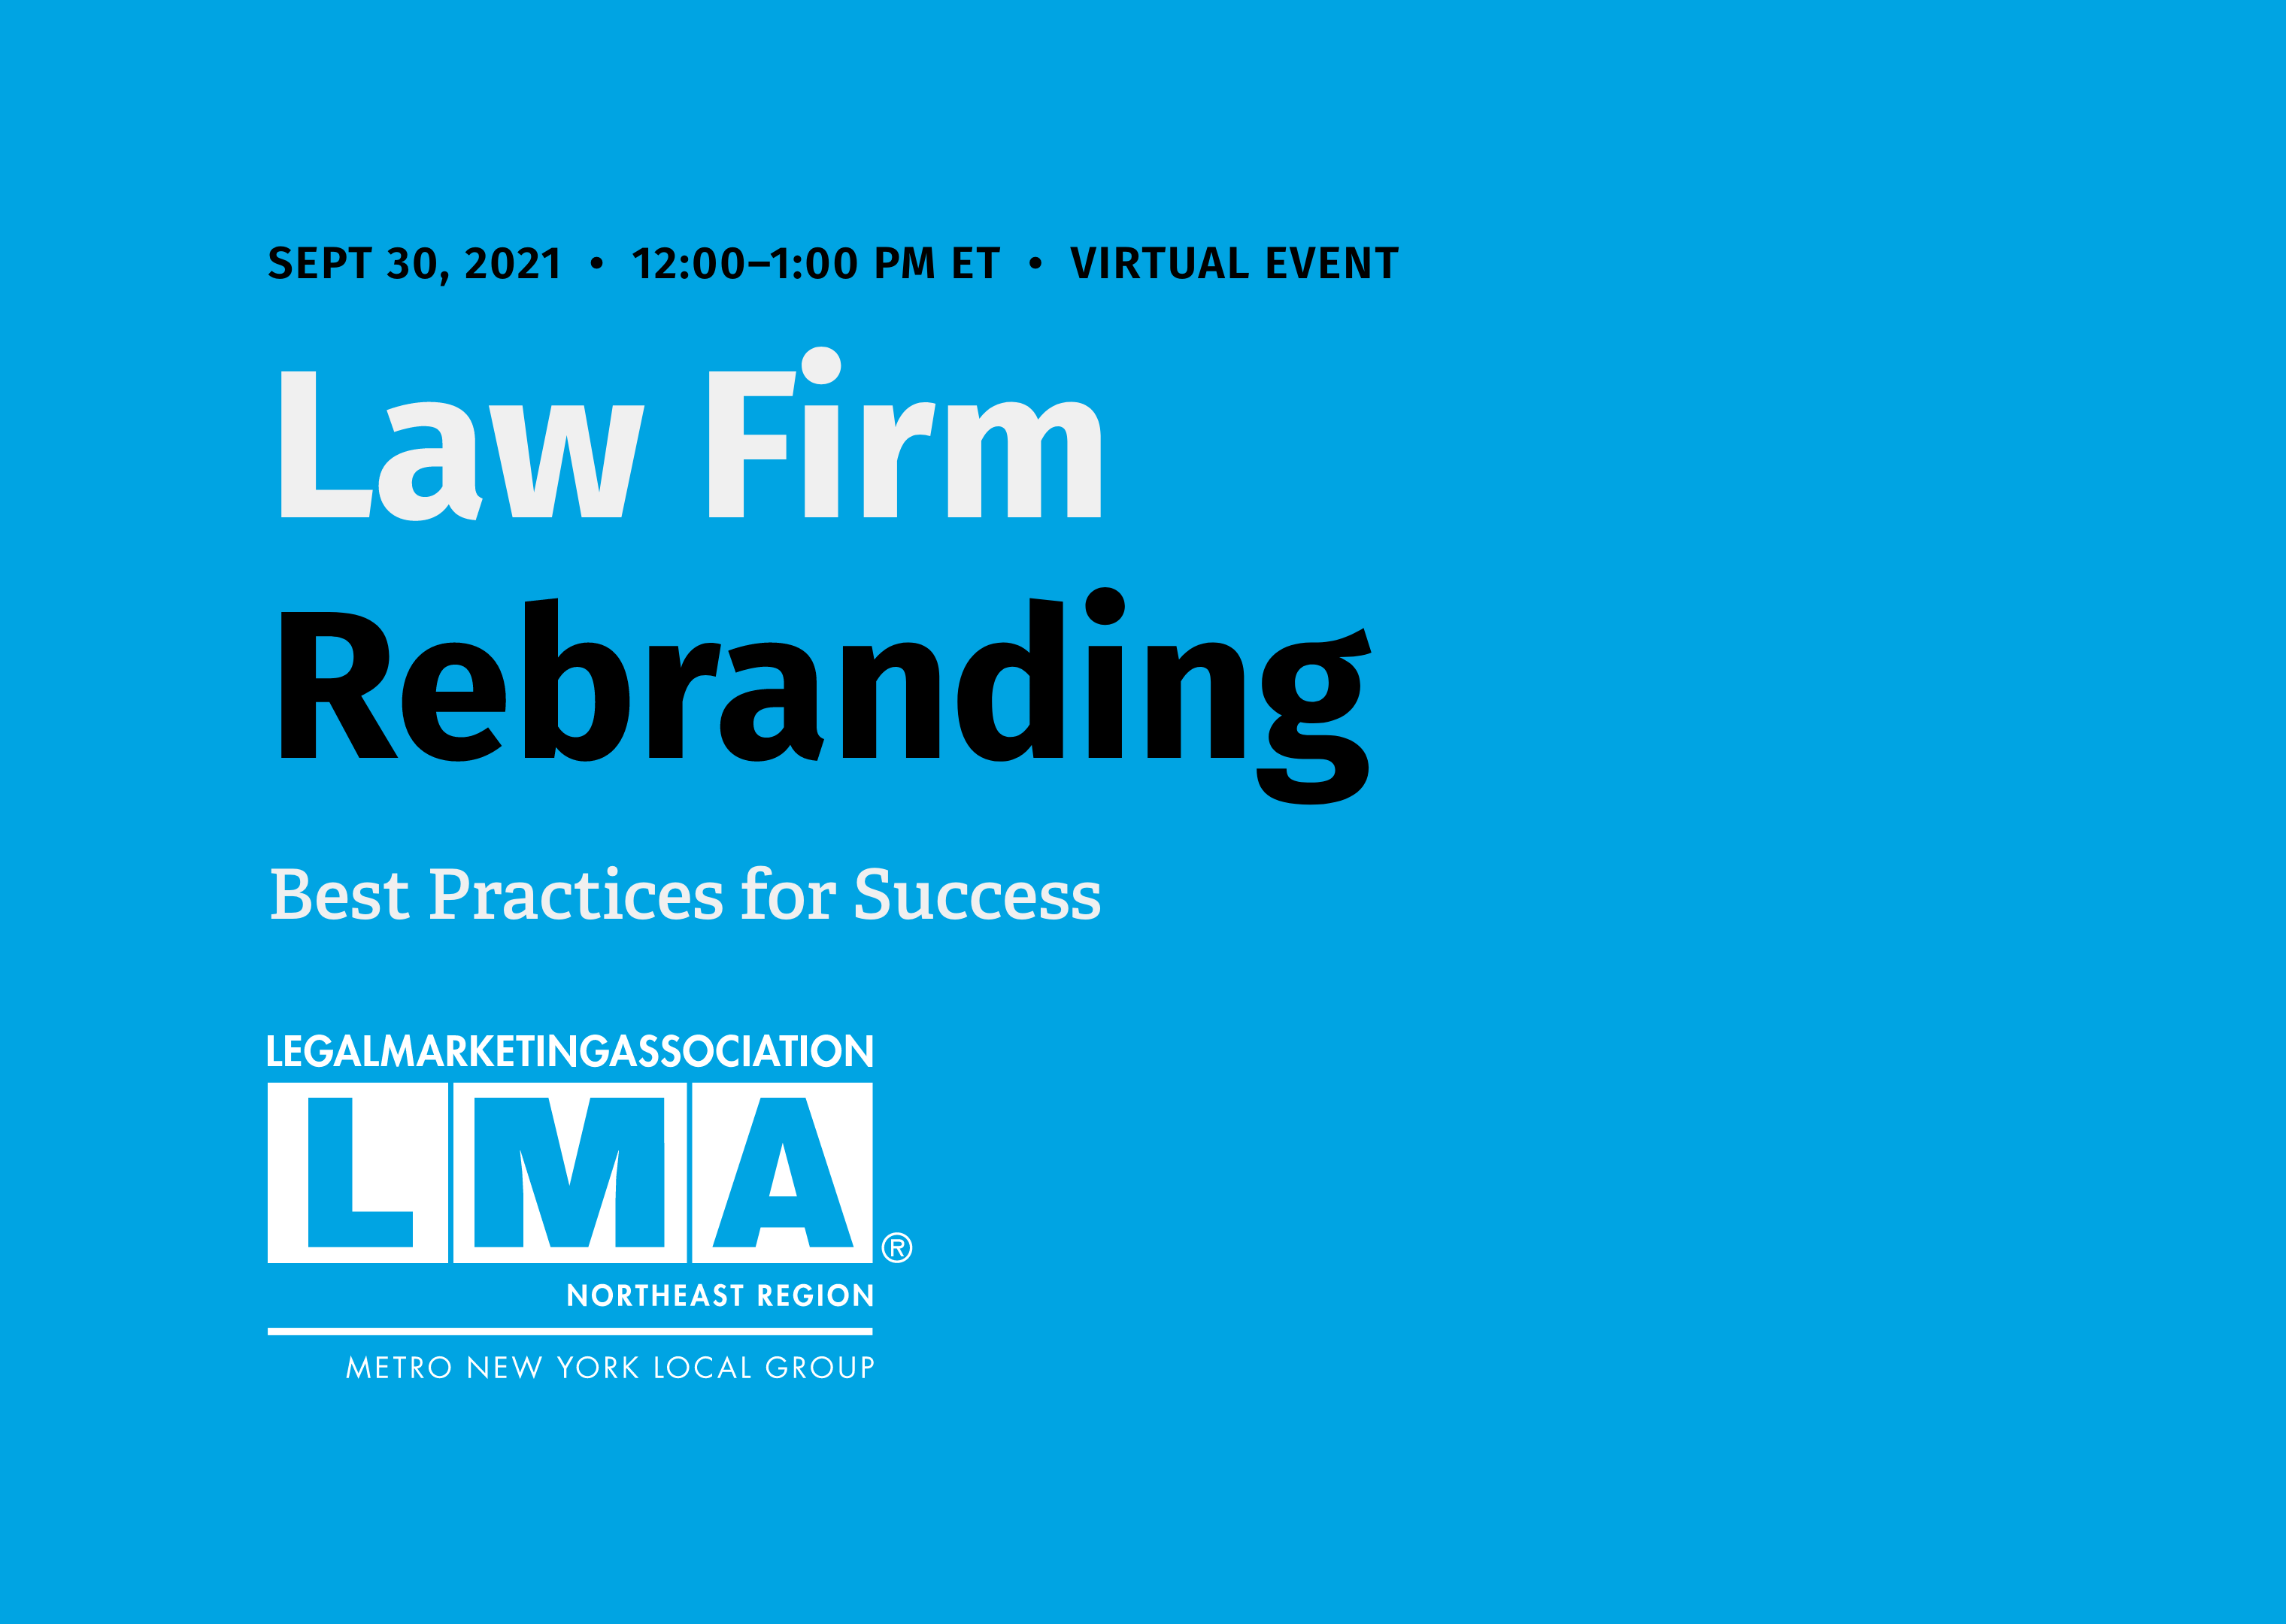 Image about LMA Event, Law Firm Rebranding